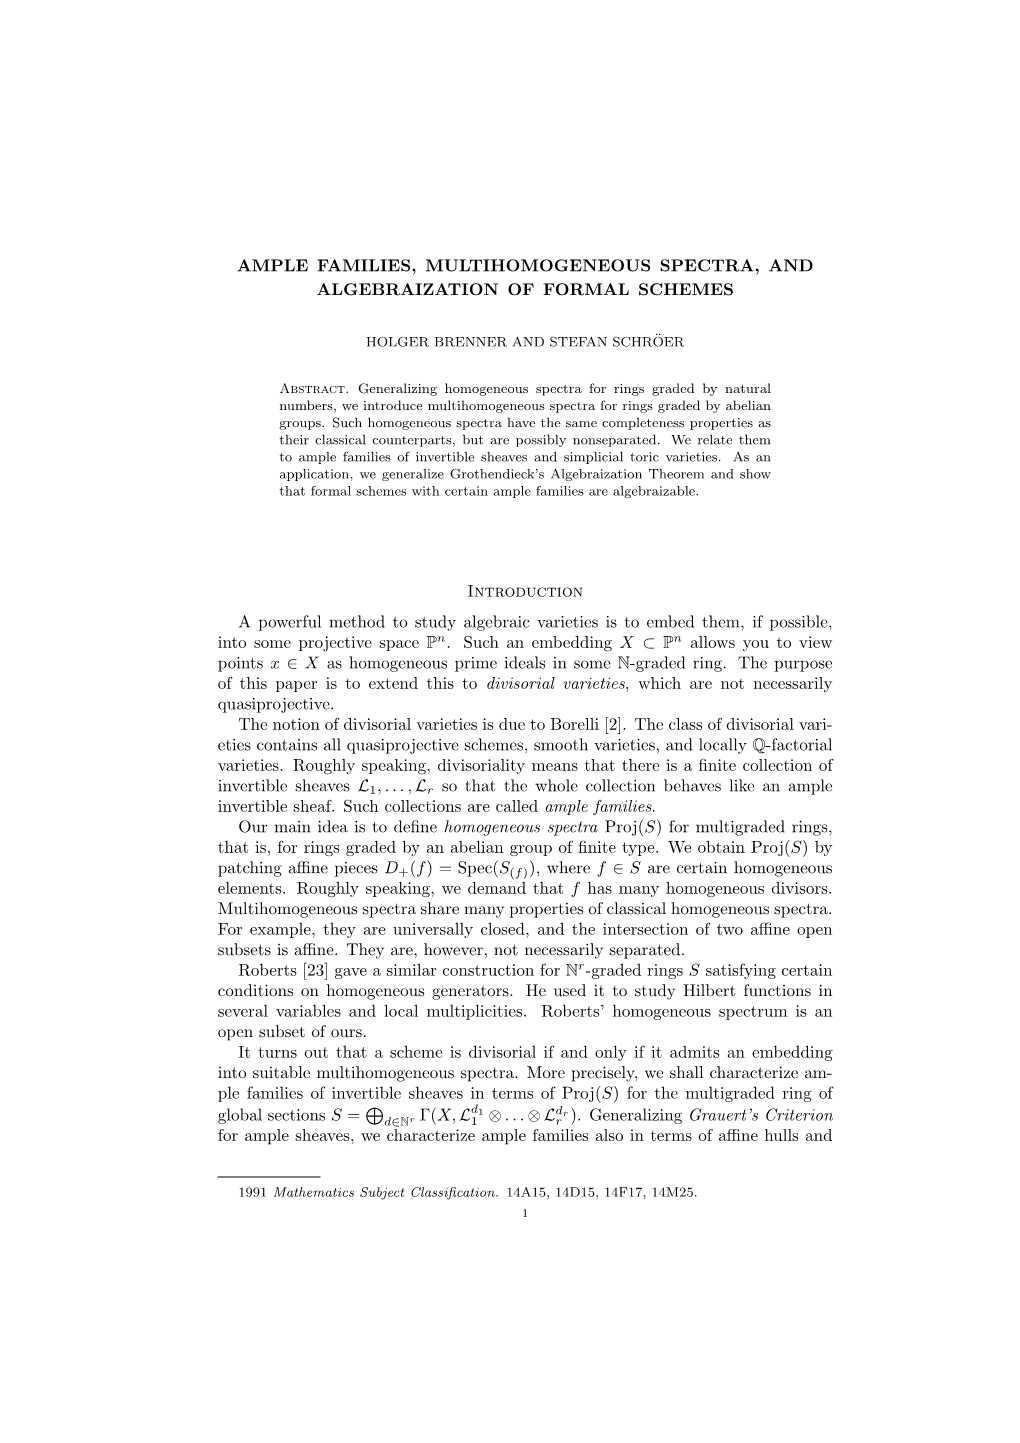 Ample Families, Multihomogeneous Spectra, and Algebraization of Formal Schemes